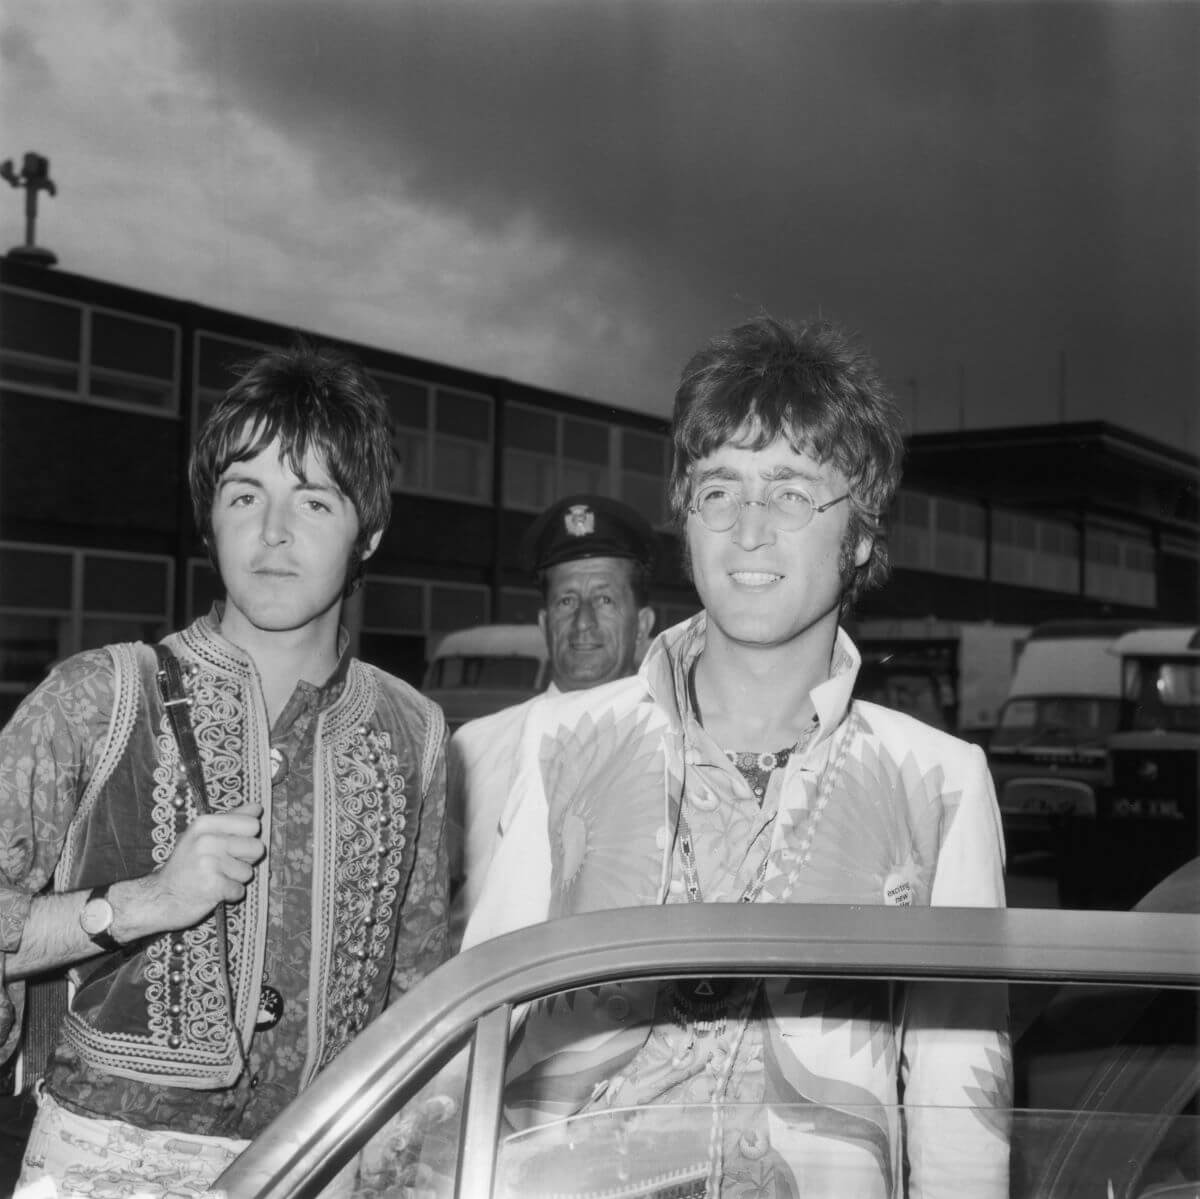 A black and white picture of John Lennon and Paul McCartney holding bags and standing behind an open car door.